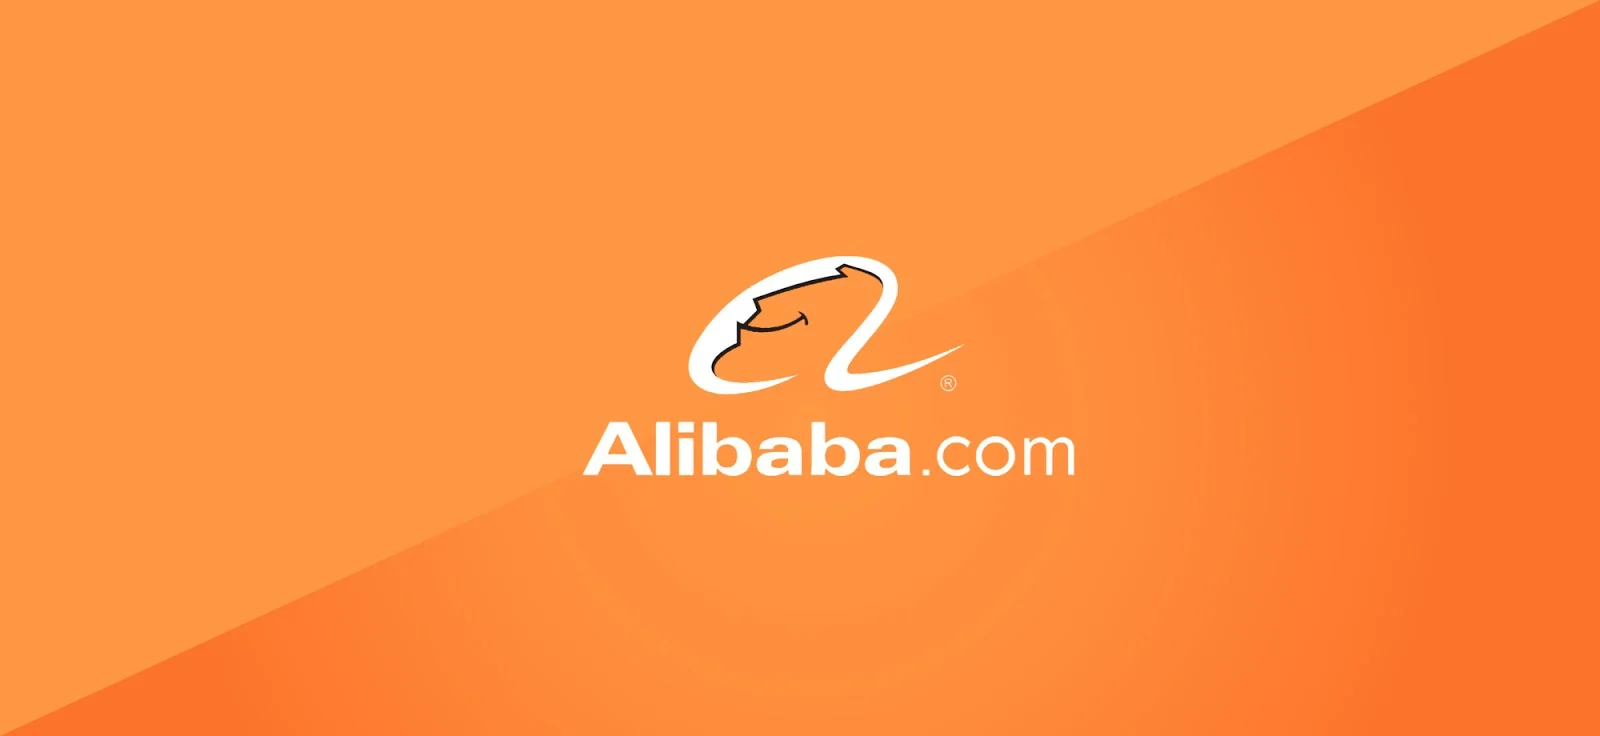 omnichannel retail examples alibaba